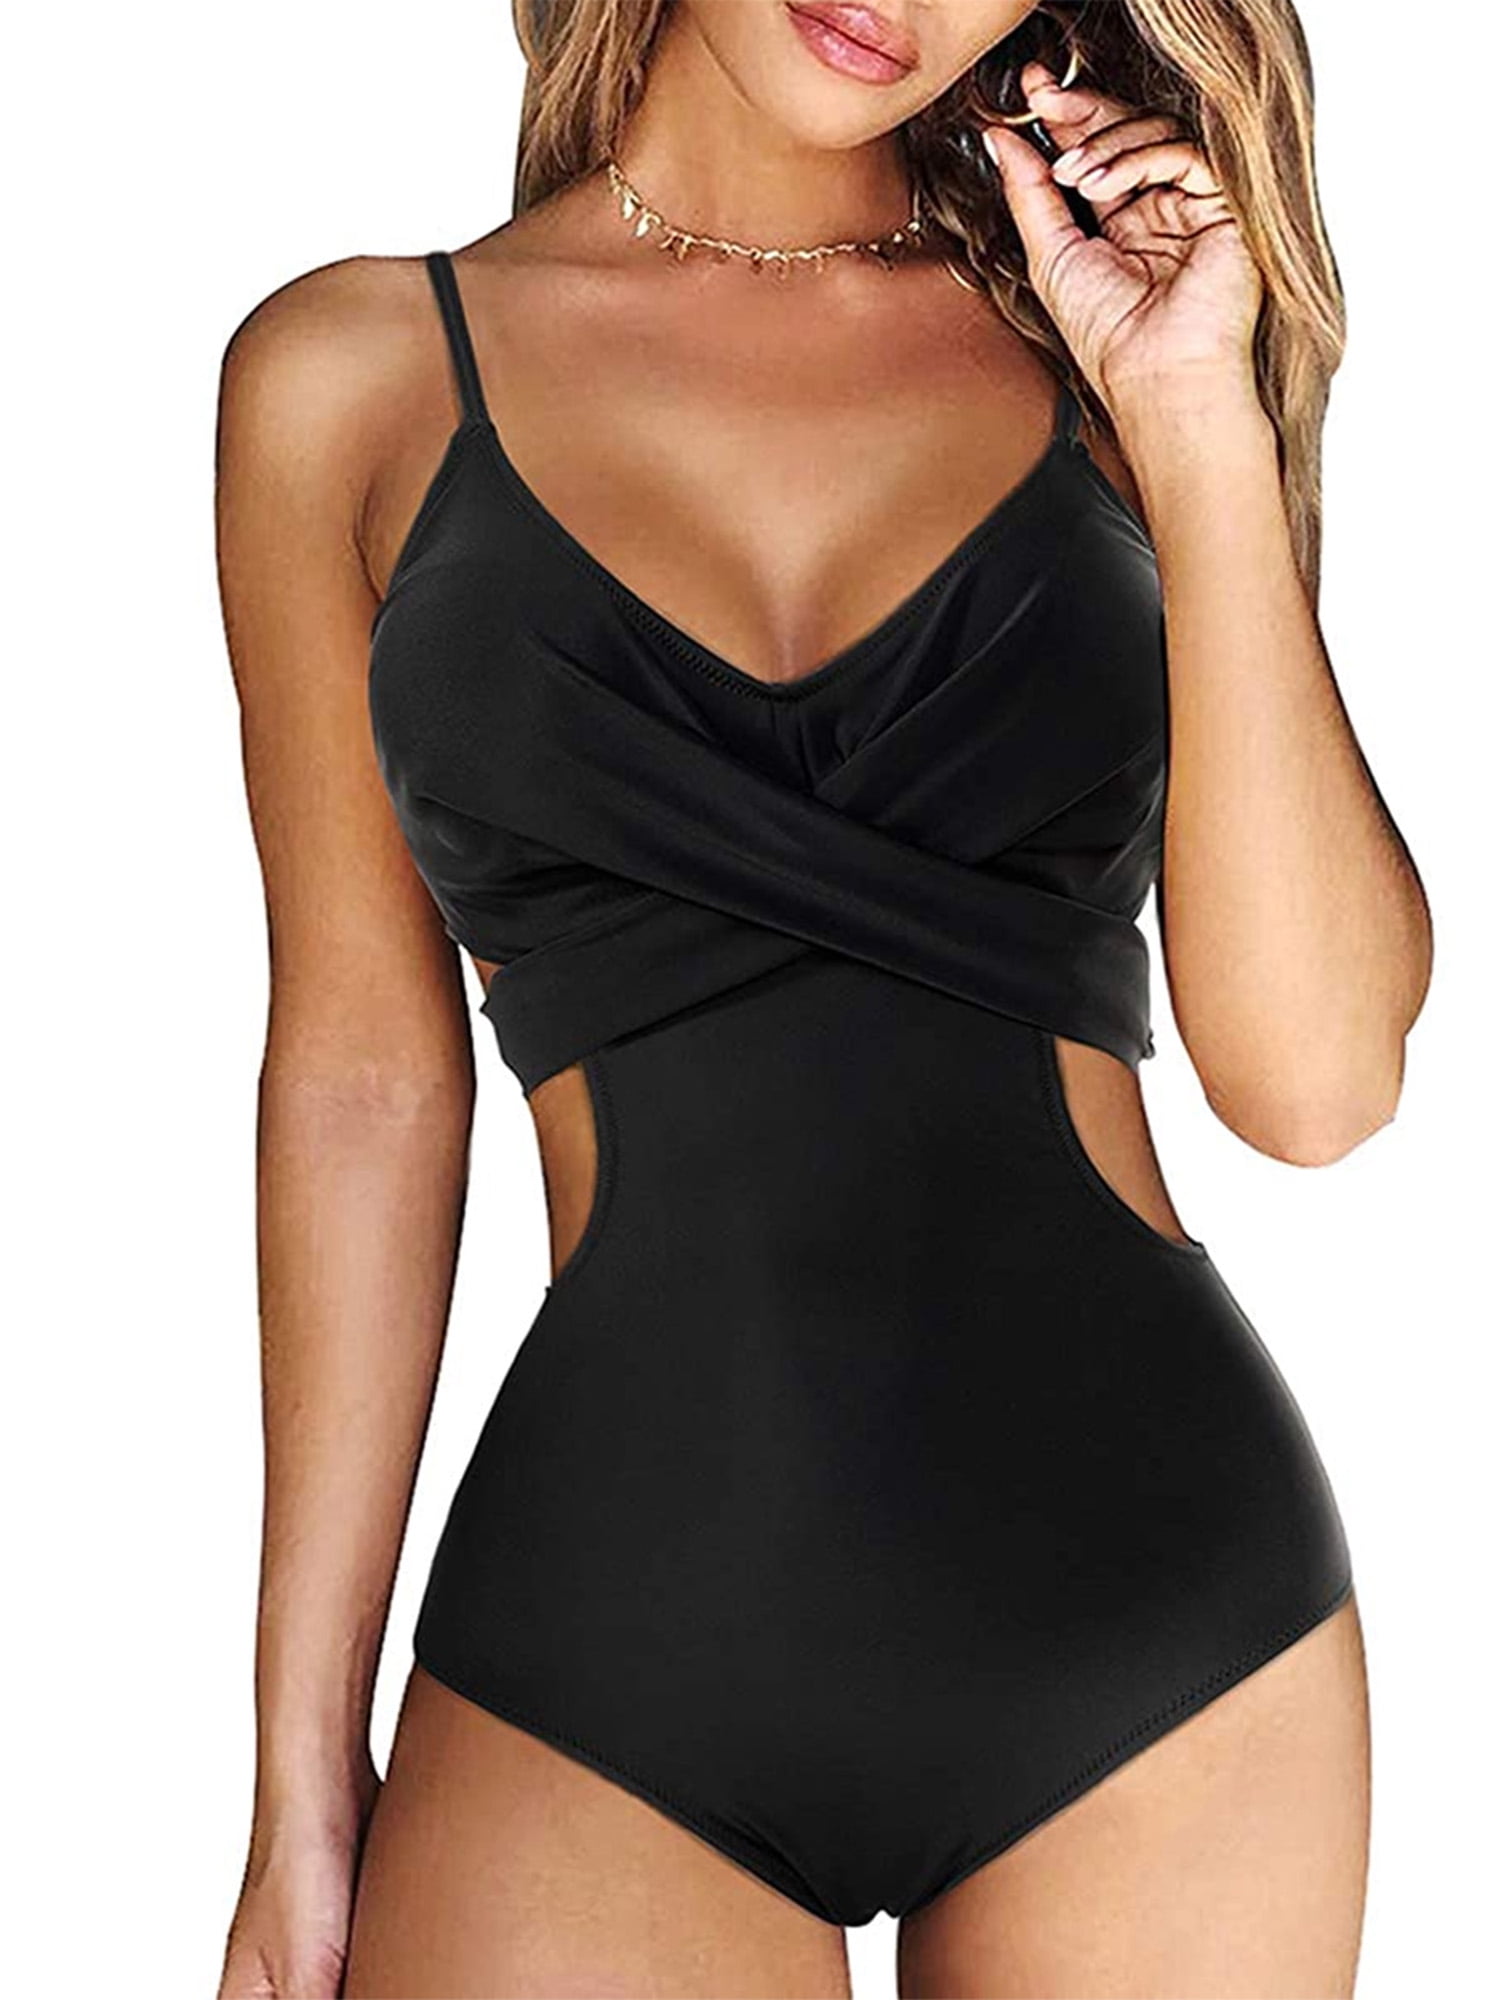 COUTEXYI Women's One-piece Sling Swimsuit, V-neck Hollowed